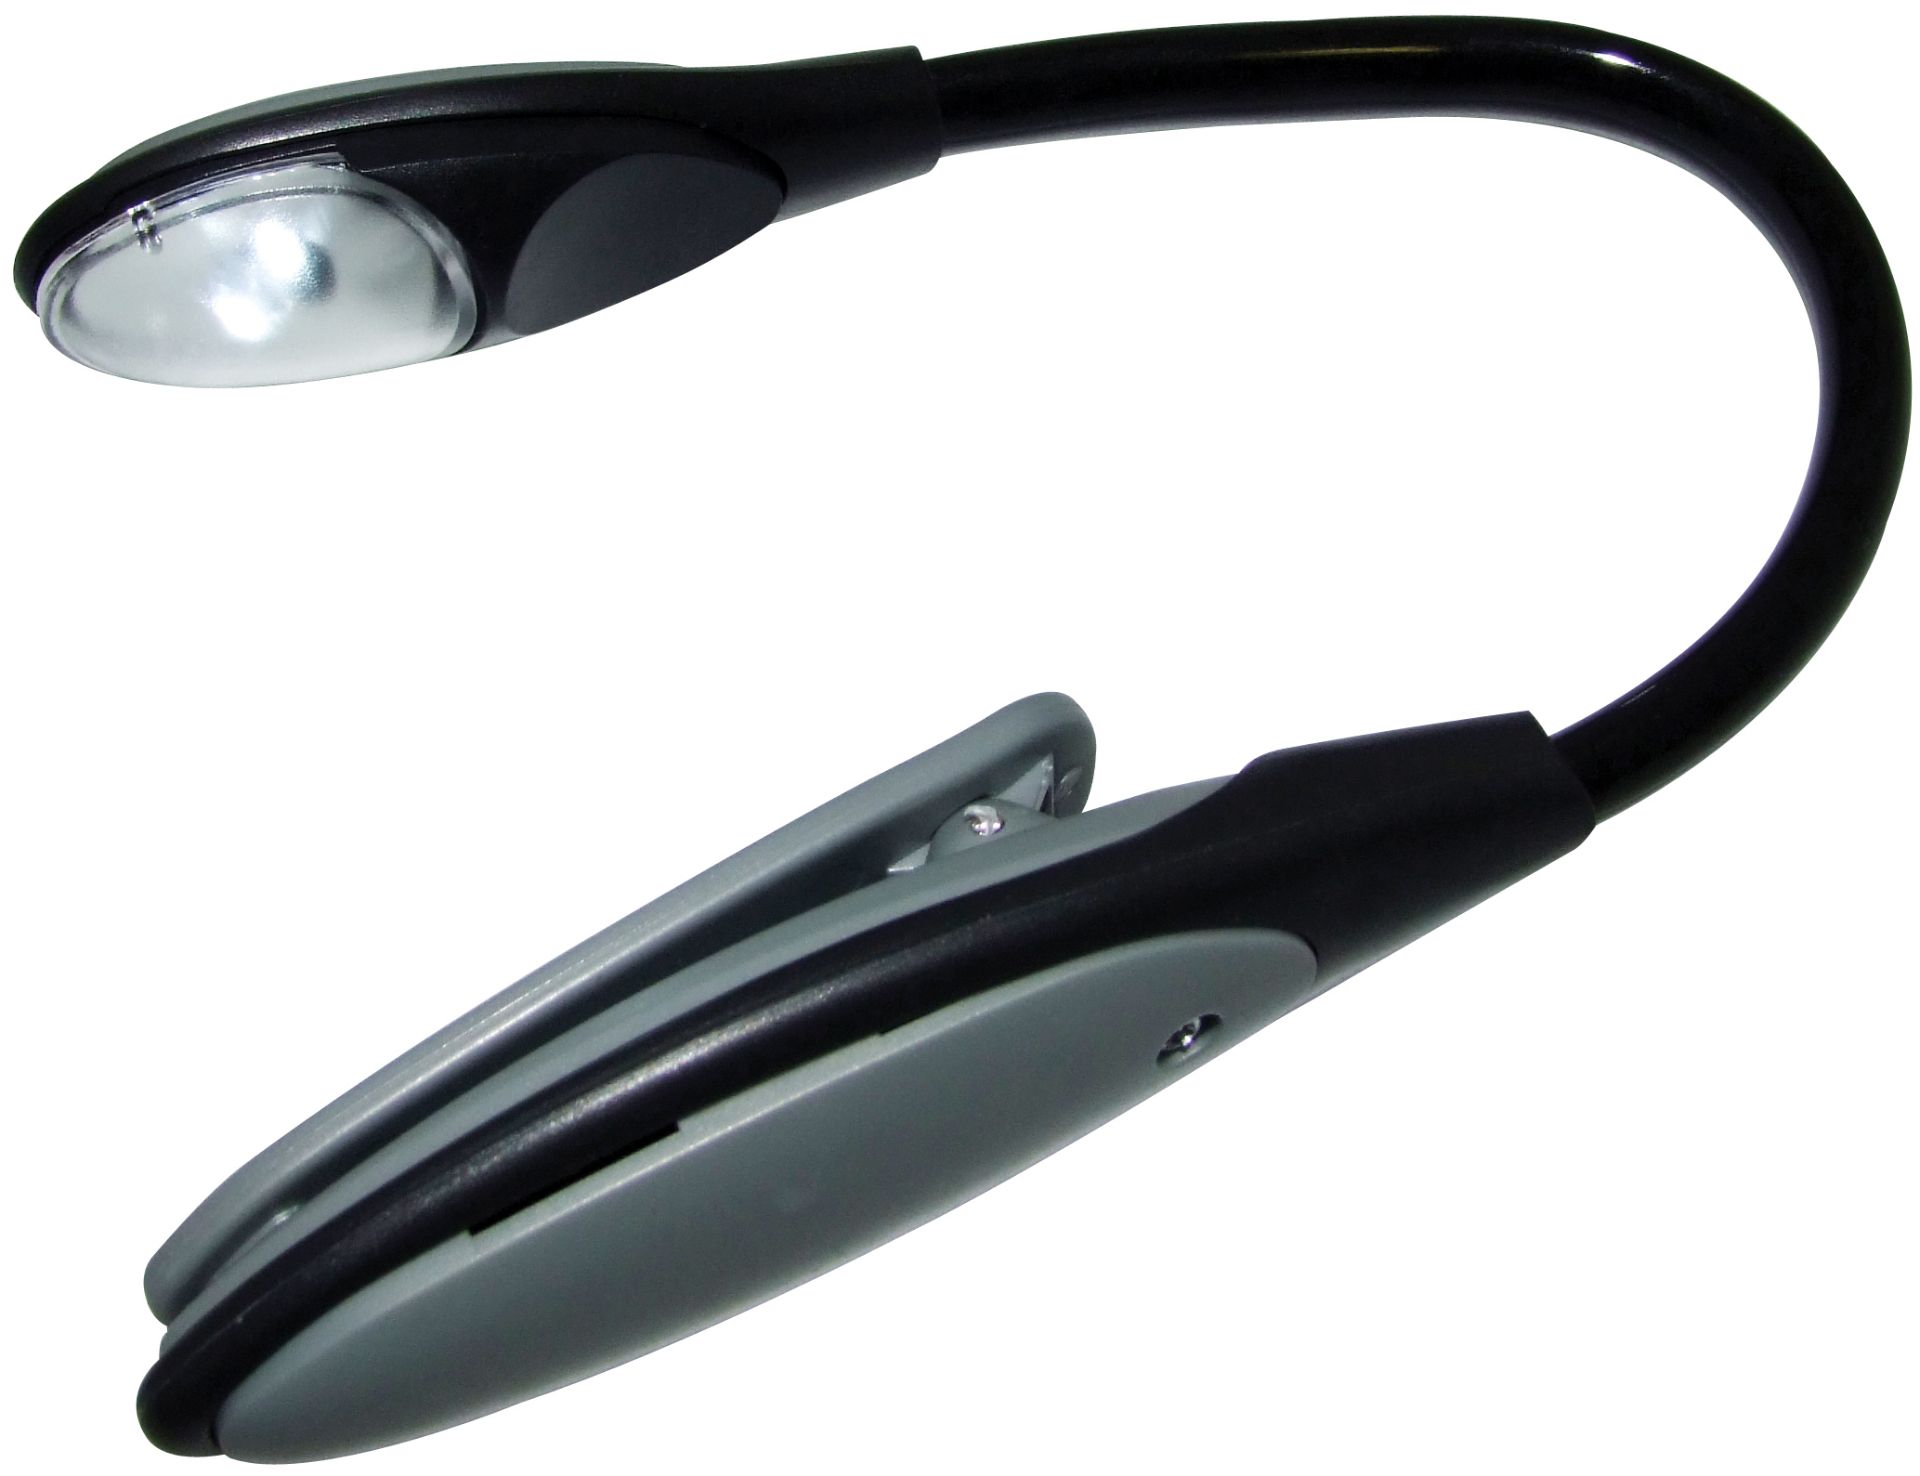 V *TRADE QTY* Brand New Flexible LED Clip Light X 10 YOUR BID PRICE TO BE MULTIPLIED BY TEN